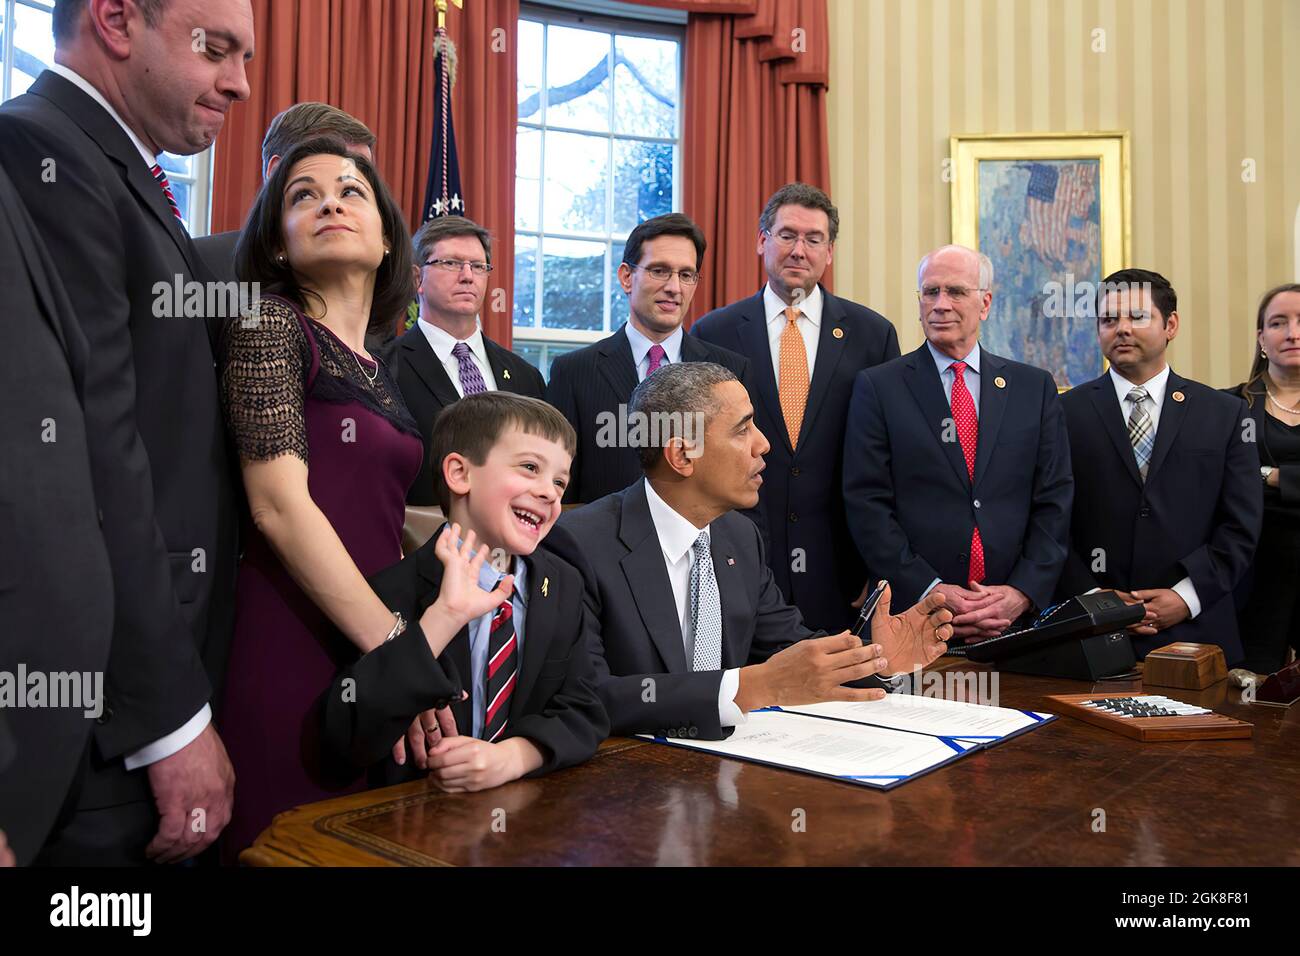 Mark and Ellyn Miller and their son Jacob react before President Barack Obama signs H.R. 2019, the Gabriella Miller Kids First Research Act, in the Oval Office, April 3, 2014. The law ends taxpayer contributions to the Presidential Election Campaign Fund and diverts the money in that fund to pay for research into pediatric cancer through the National Institutes of Health (NIH). (Official White House Photo by Pete Souza) This official White House photograph is being made available only for publication by news organizations and/or for personal use printing by the subject(s) of the photograph. Th Stock Photo